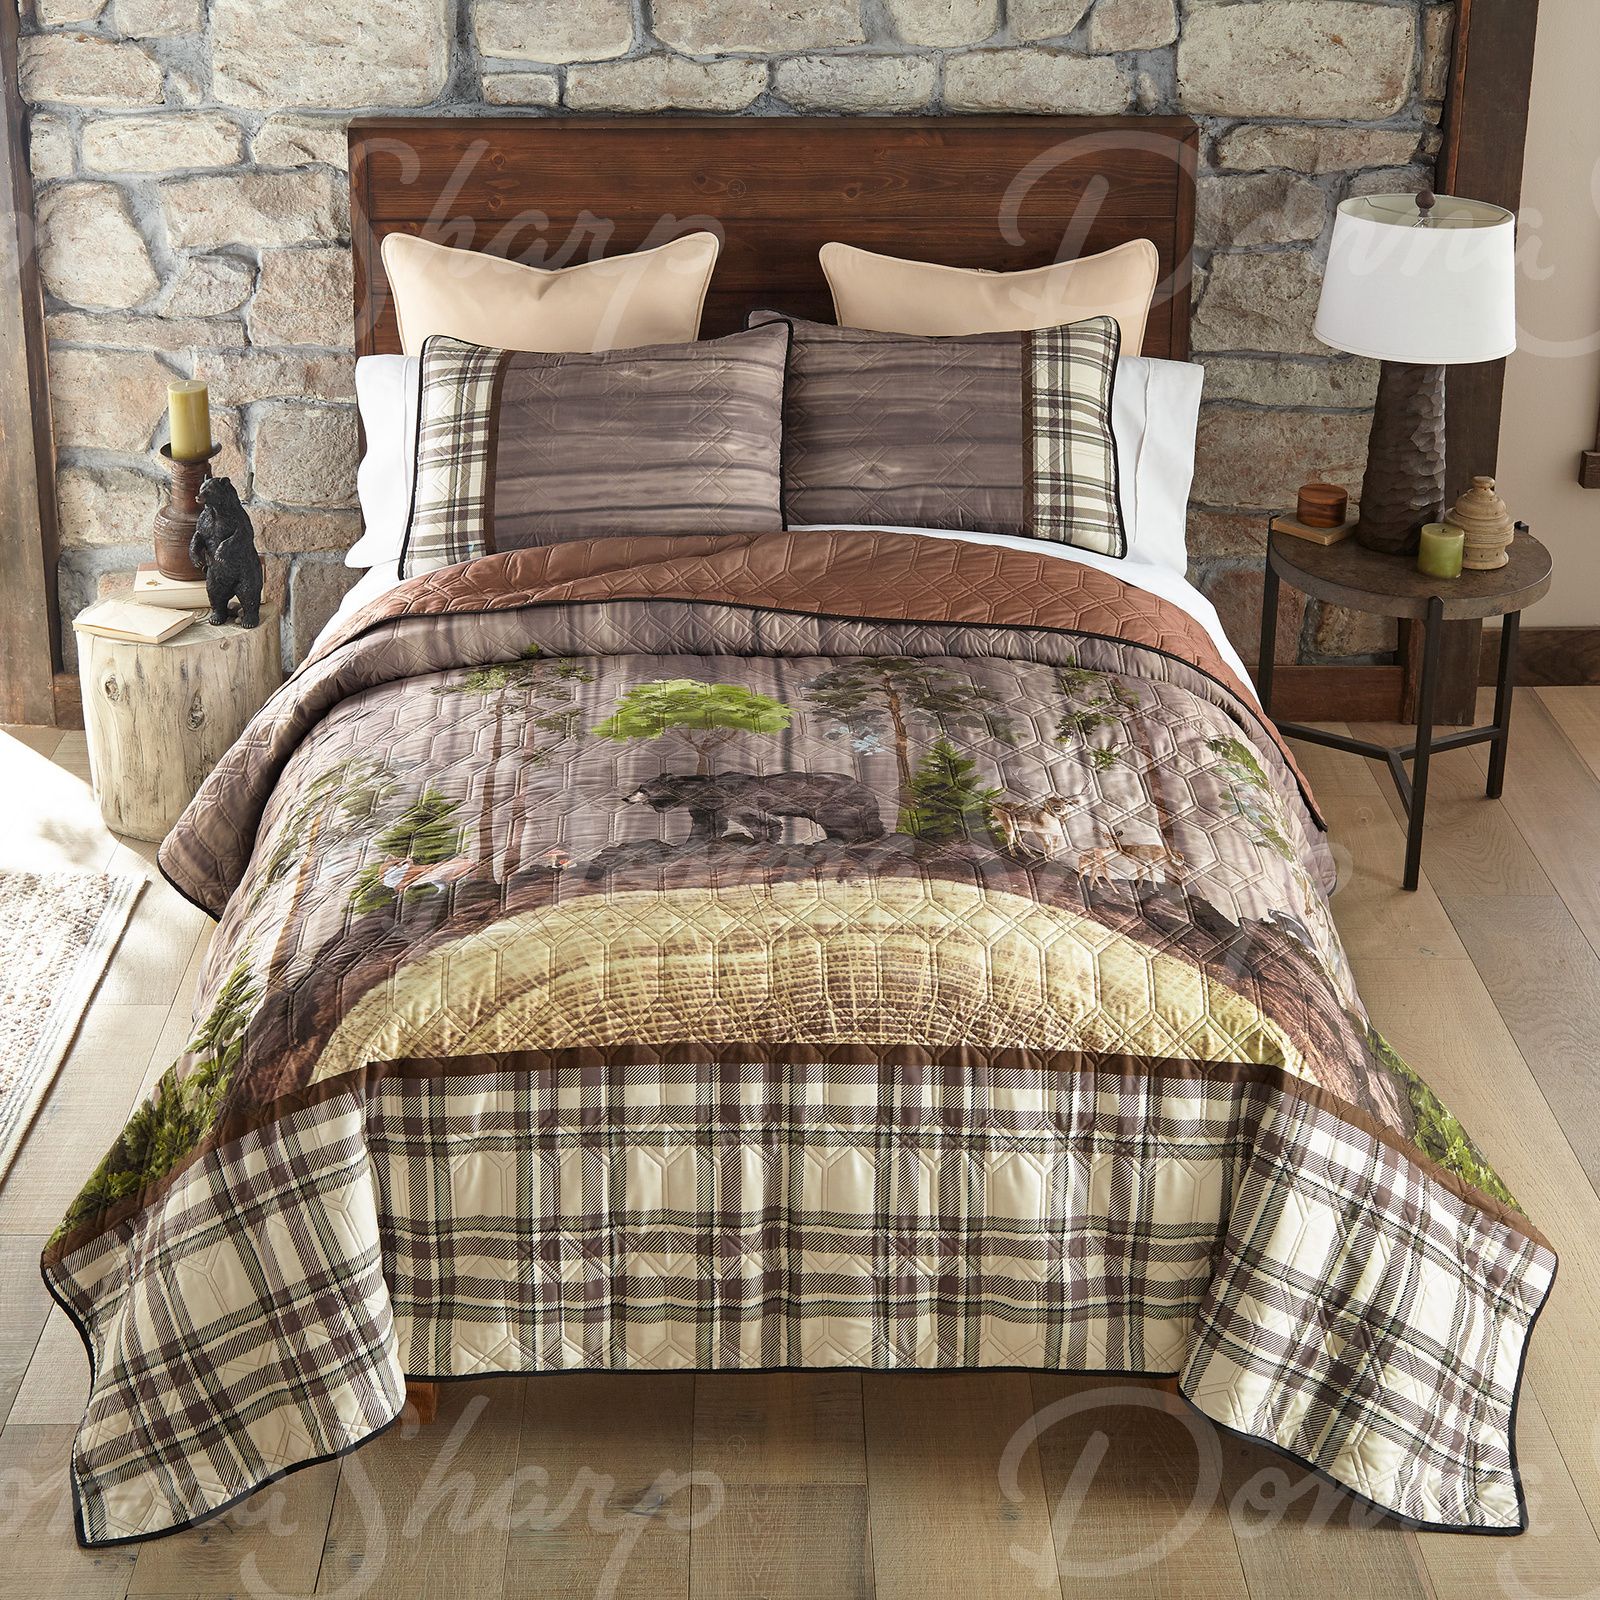 Millwood Pines Clough True Grit The Lodge 100% Cotton Rustic Cabin Outdoor  Hunting Quilt & Sham Set & Reviews